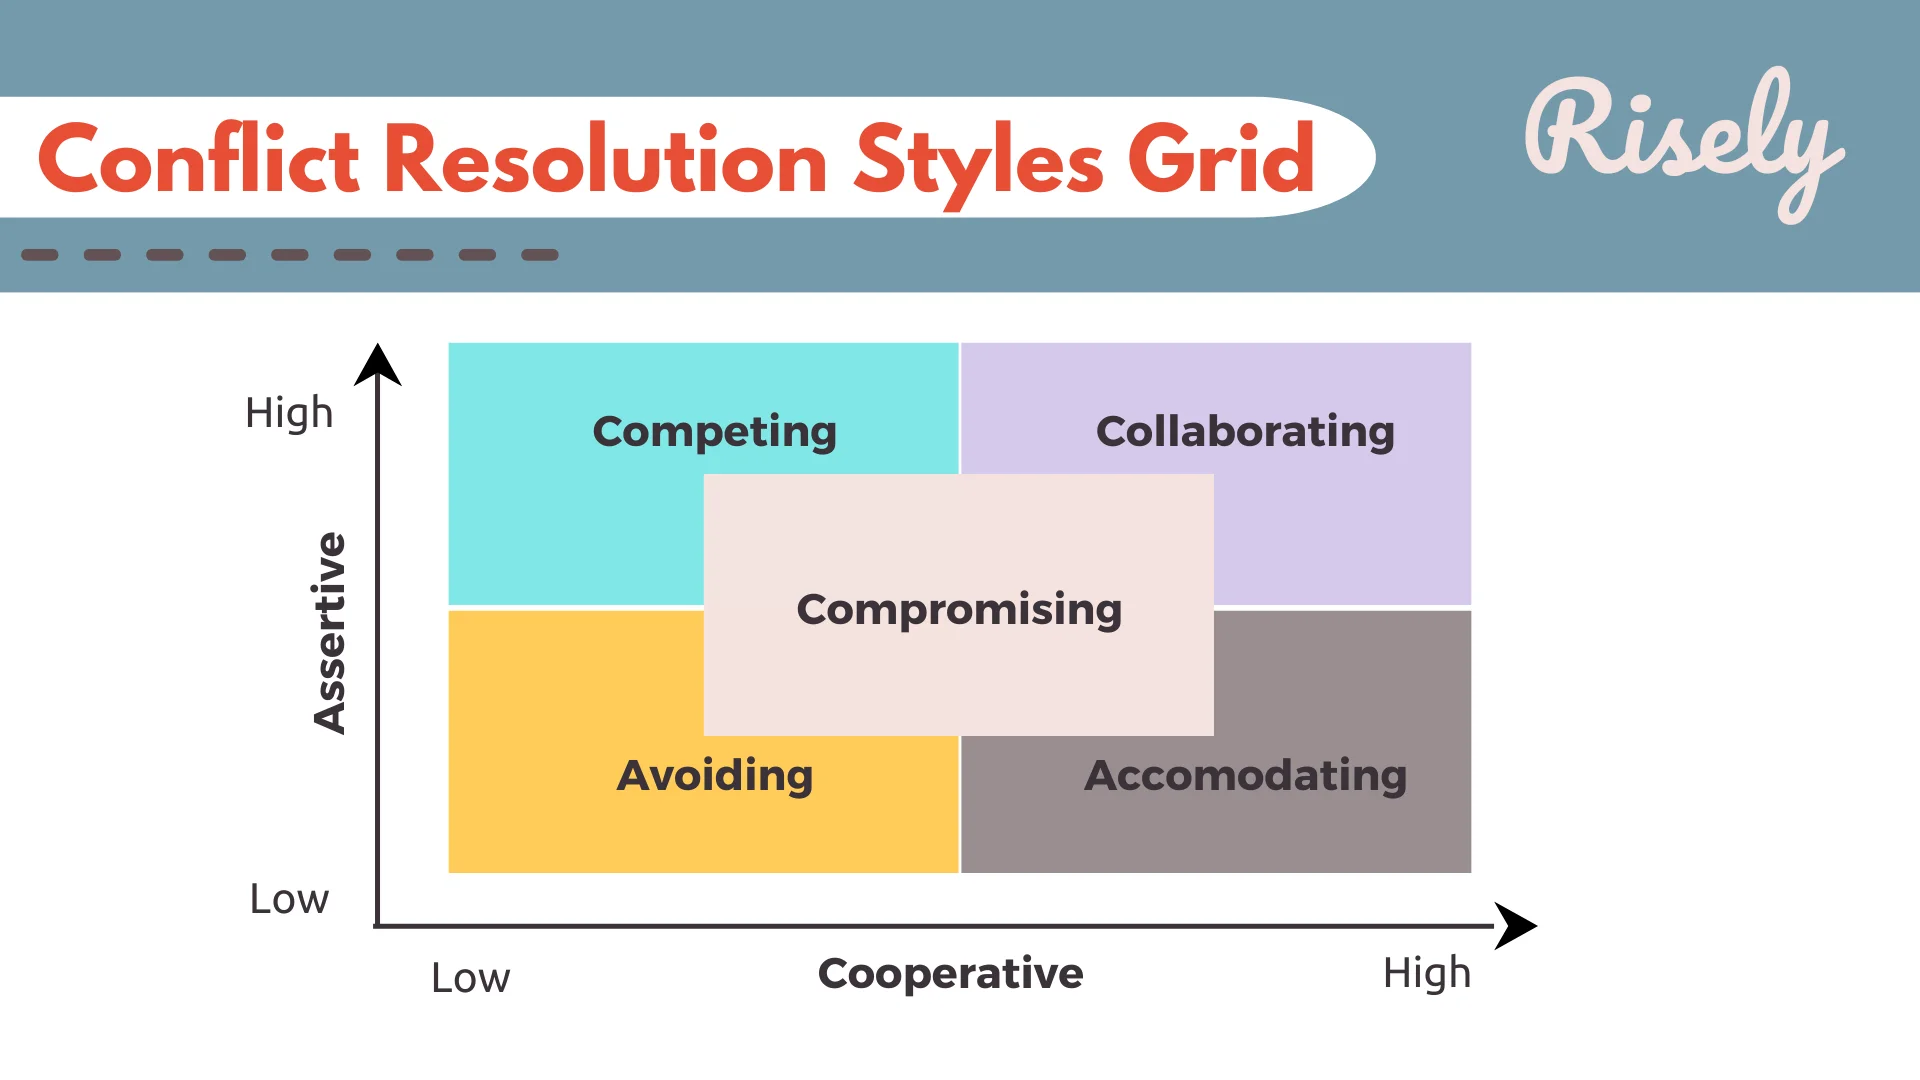 The Conflict Resolution Styles Grid